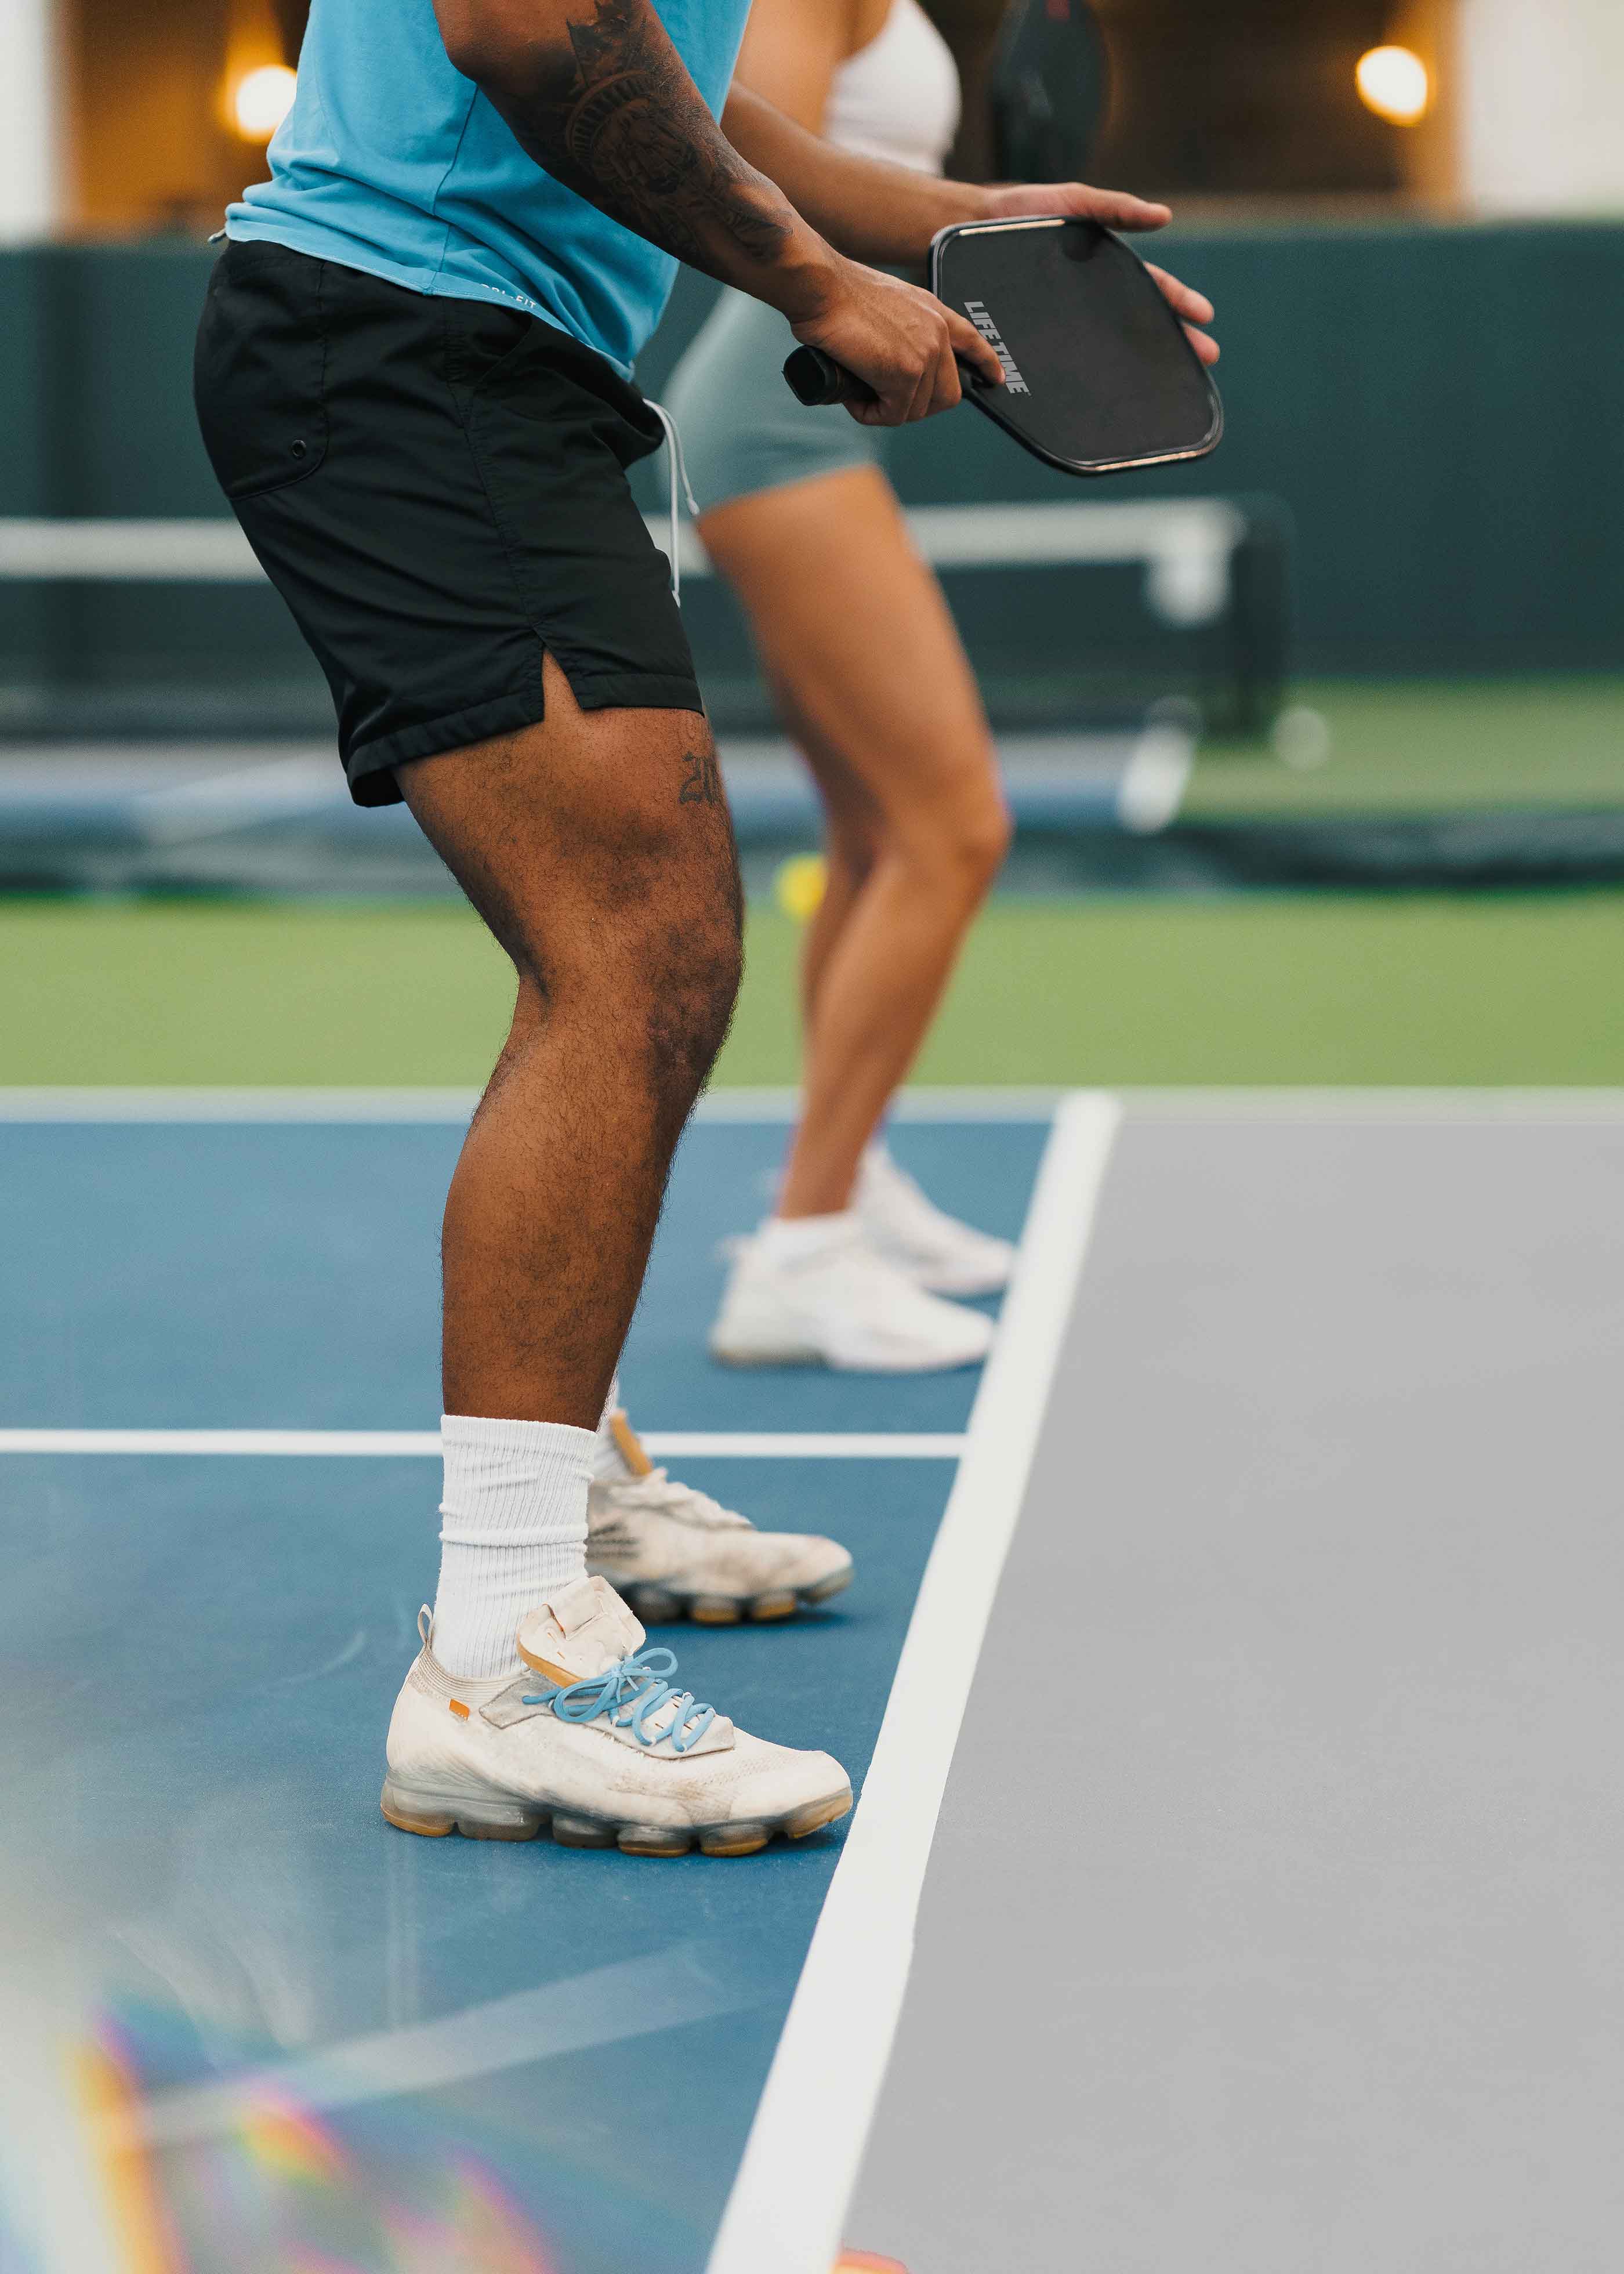 Two pickleball players stand ready on a pickleball to play a doubles game